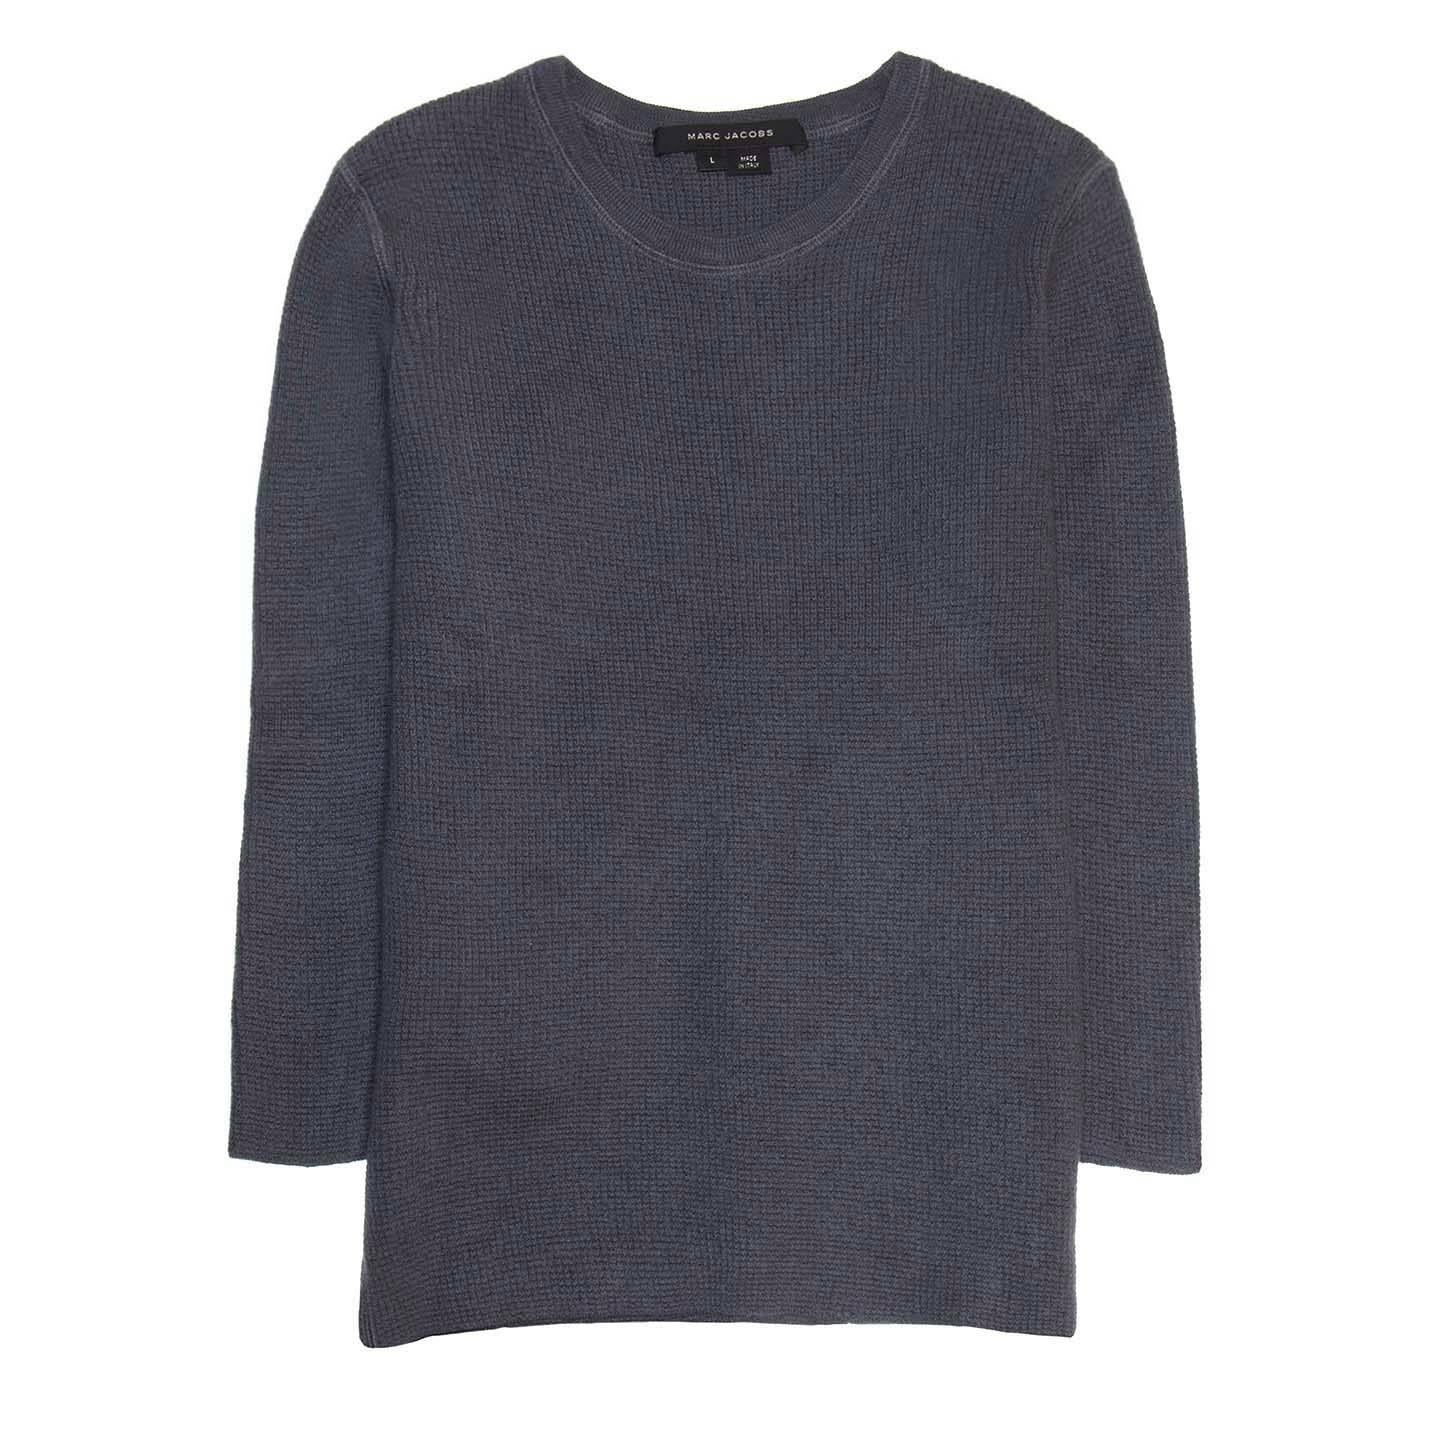 Petrol blue waffle thermal style cashmere knit with crew neck and 3/4 sleeves. A small ribbed border ornate the collar while cuffs and hem are plain. The style is fitted, hip length and it's characterized by tone-on-tone flat lock top stitches